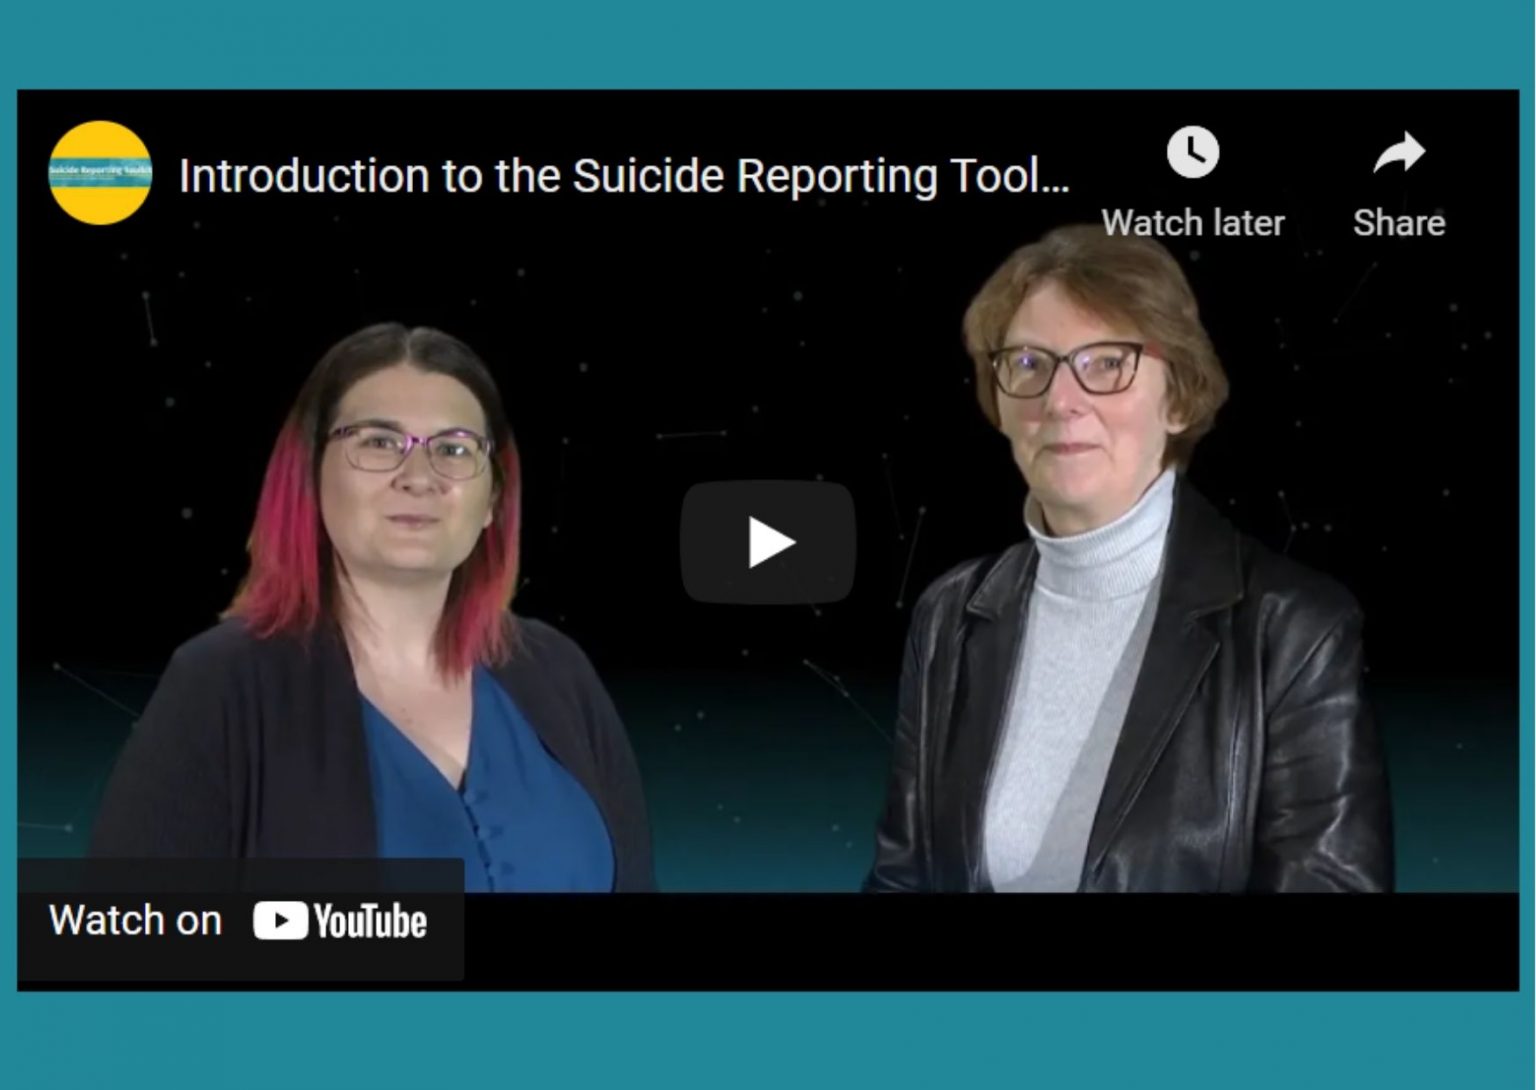 Dr. Ann Luce The Suicide Reporting Toolkit